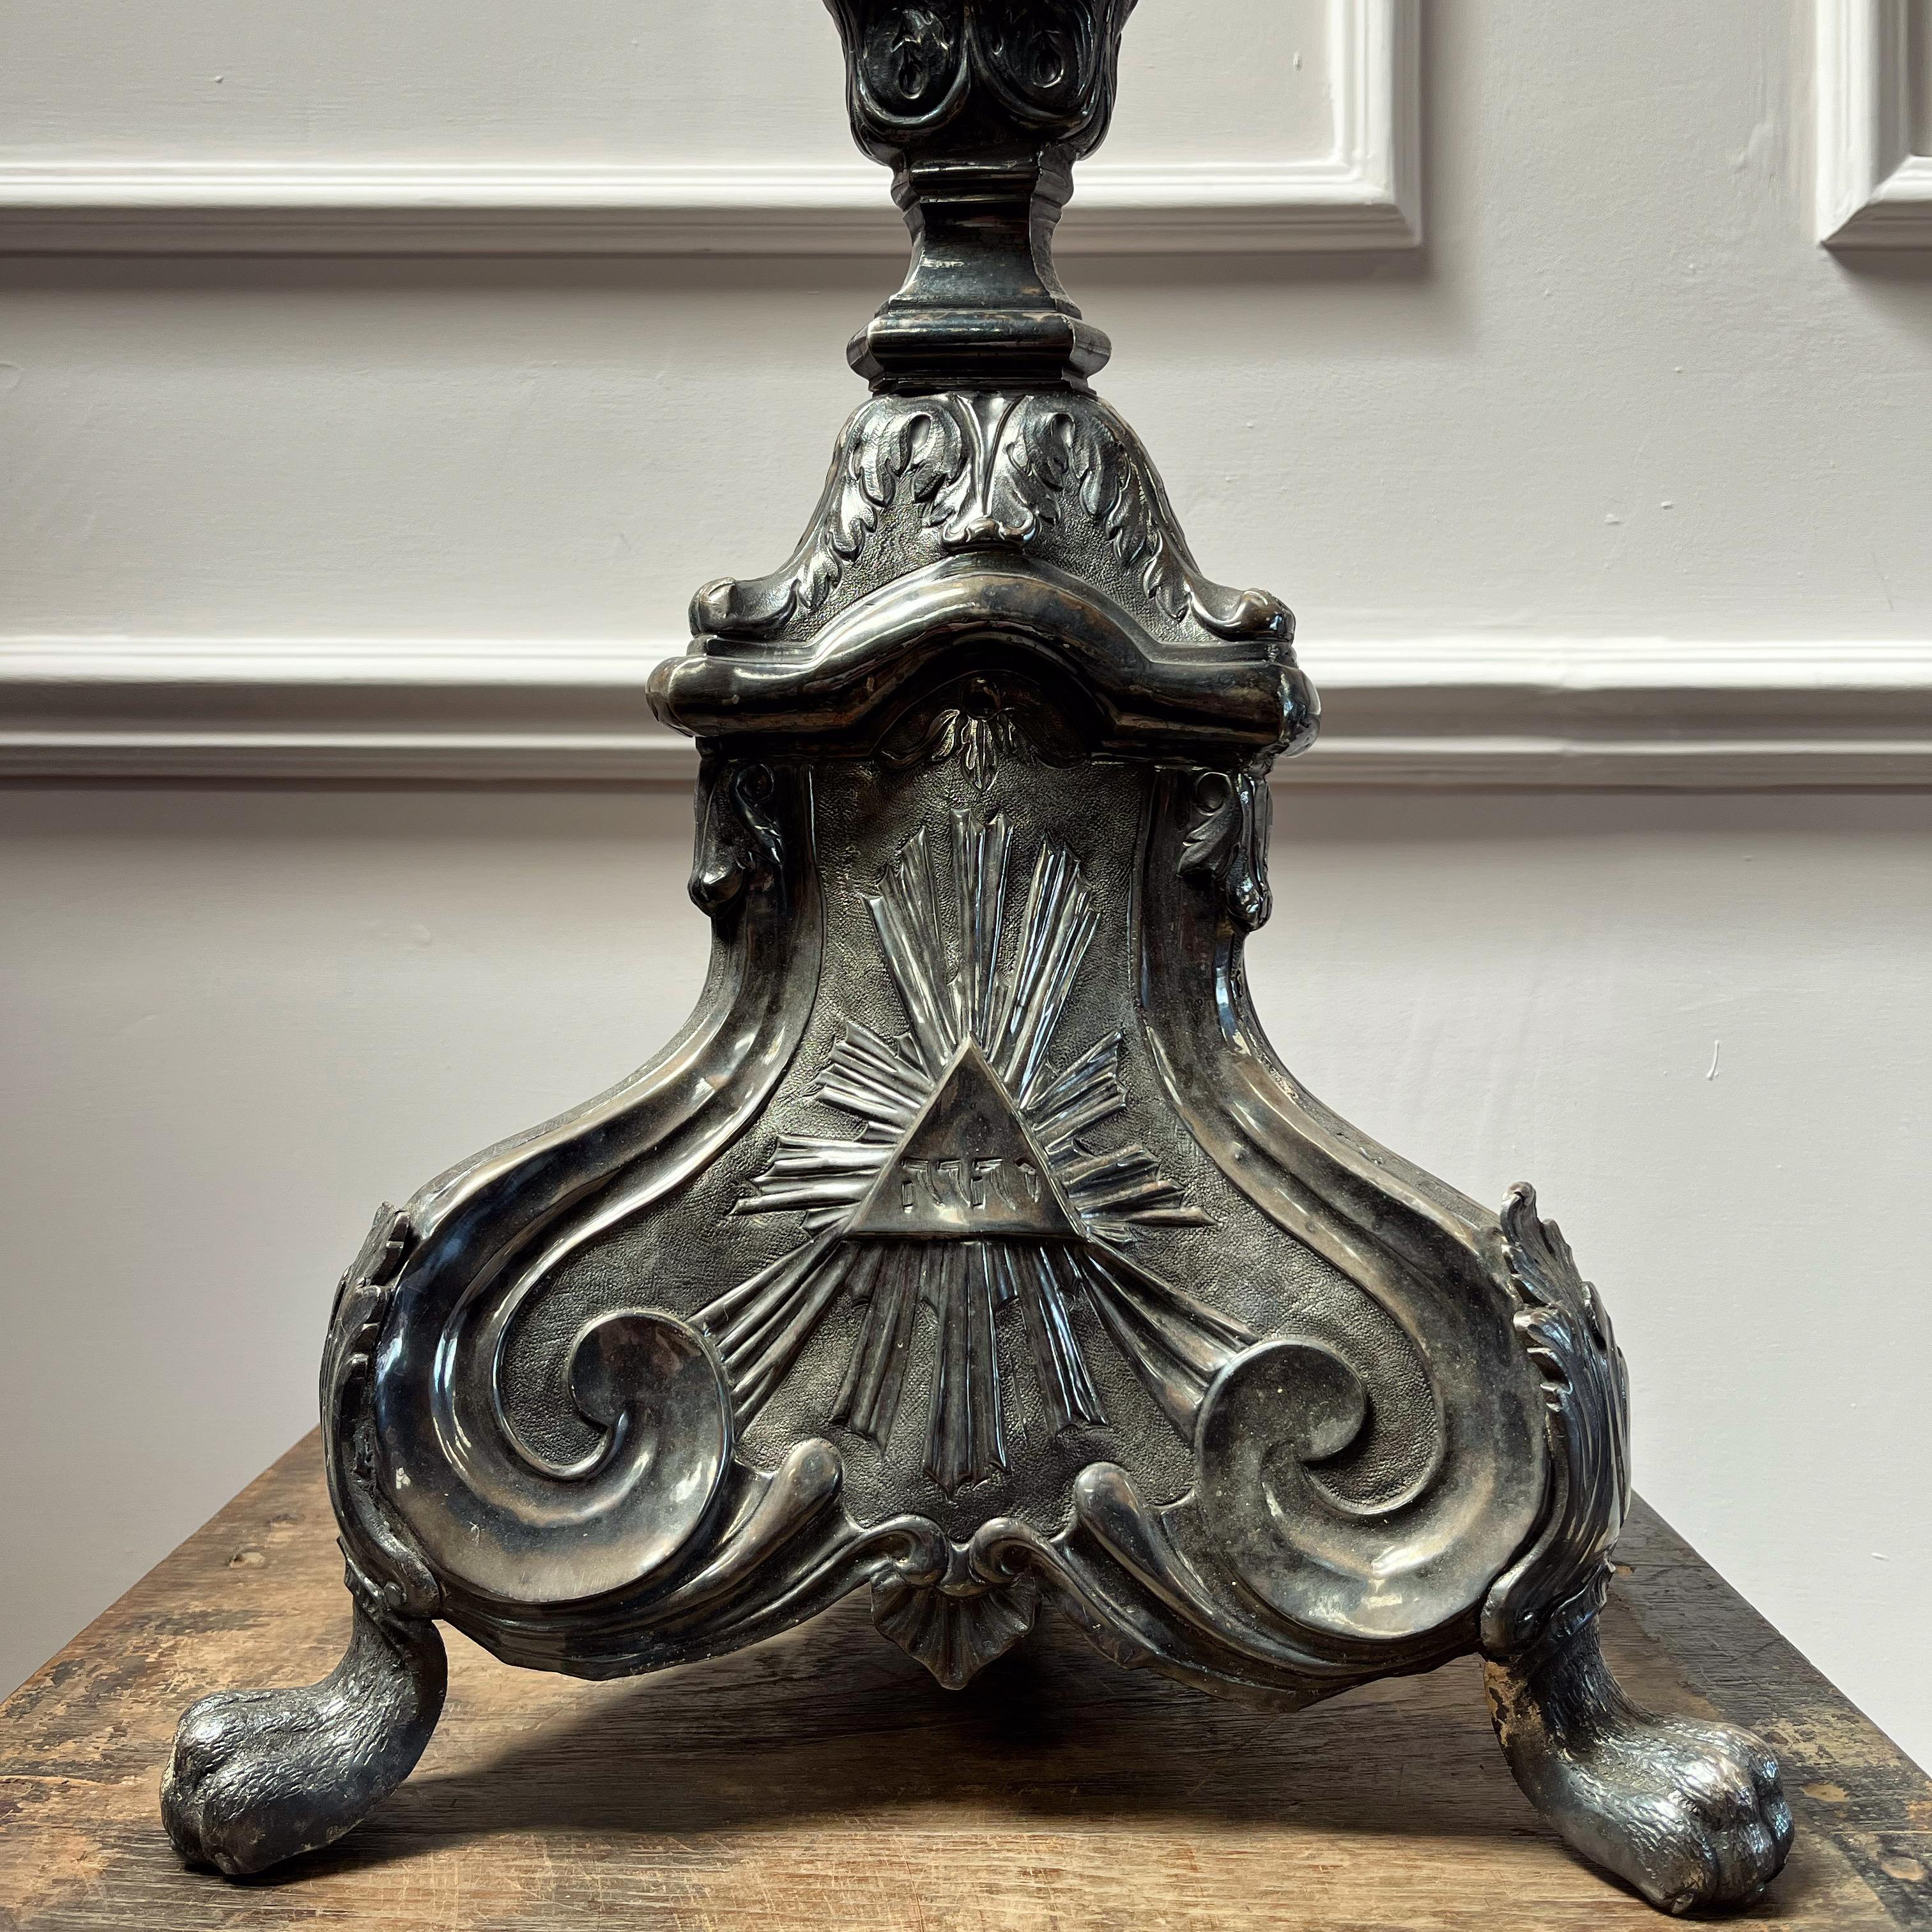 A fine pair of early nineteenth century and possibly earlier repousse candlesticks with tripod bases, exuberant scroll and hairy paw feet, now as lamps.